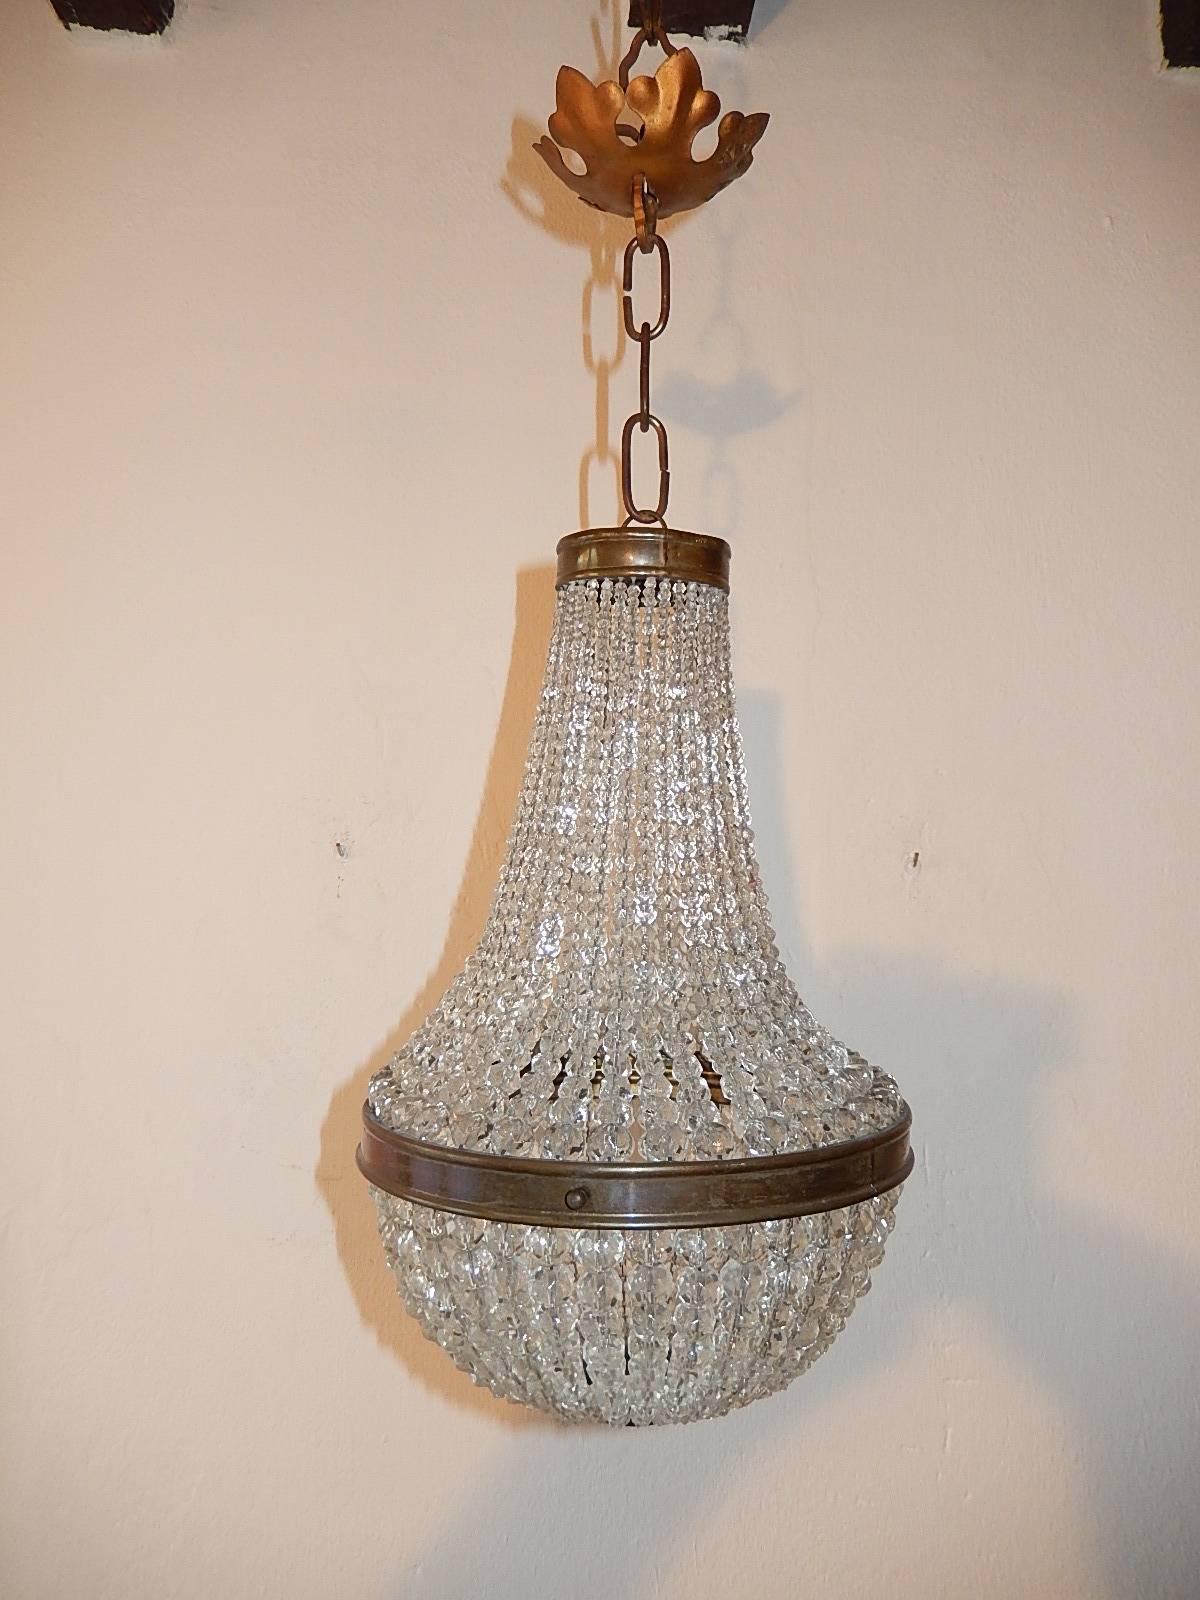 Housing one light, rewired and ready to hang. Crystal beads with crystal finial on bottom. Adding another 8 inches of original chain and canopy. Free priority shipping from Italy.